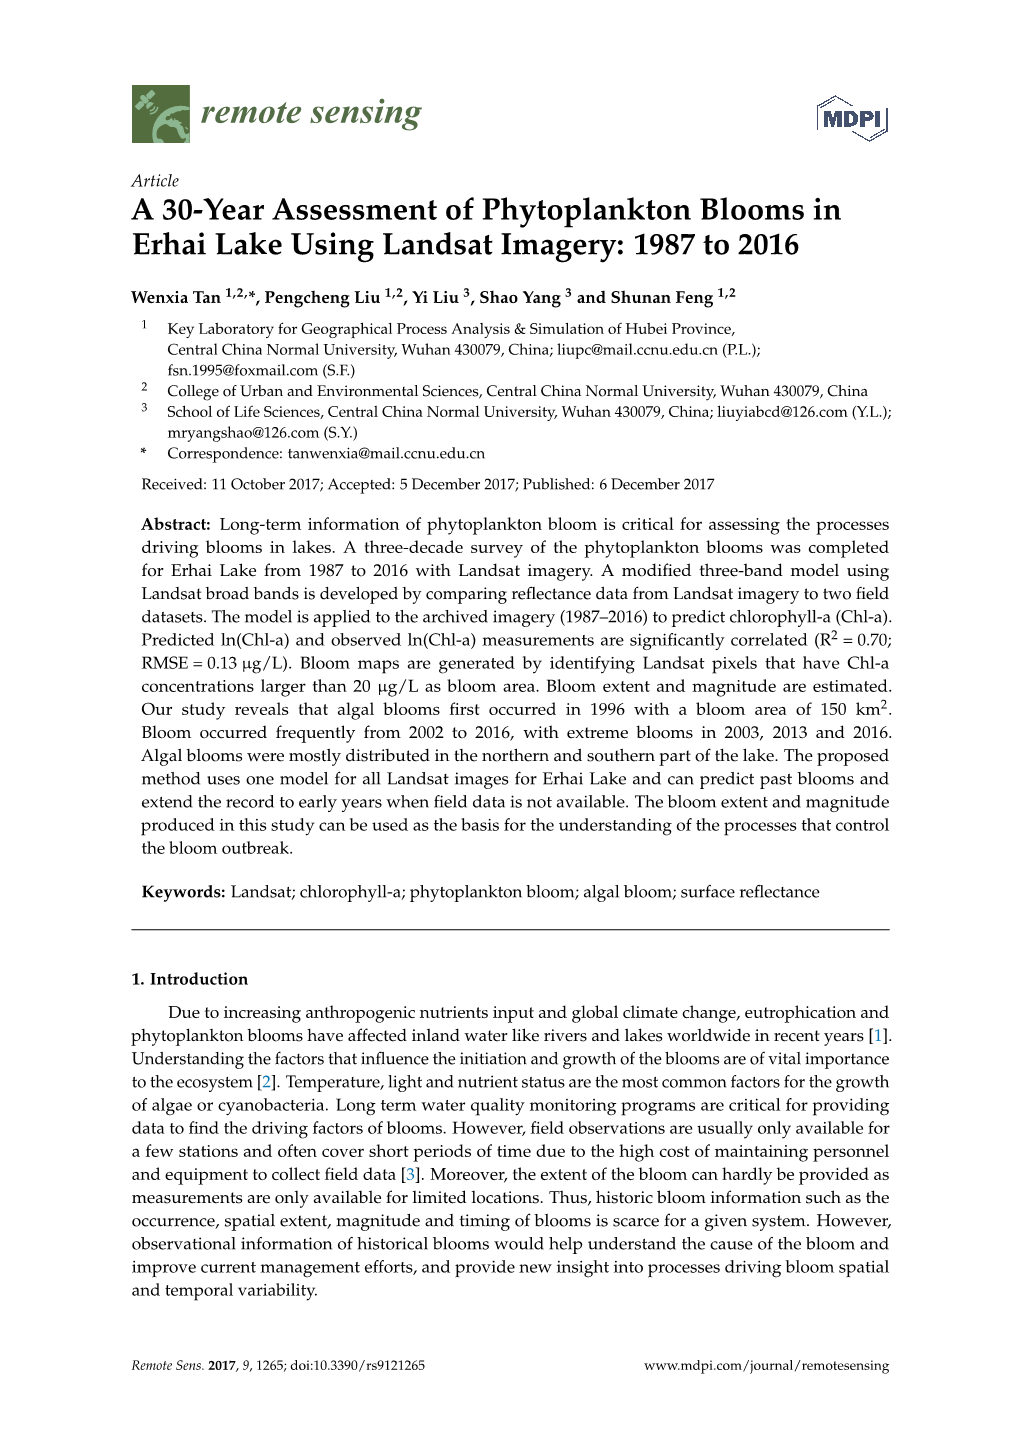 A 30-Year Assessment of Phytoplankton Blooms in Erhai Lake Using Landsat Imagery: 1987 to 2016